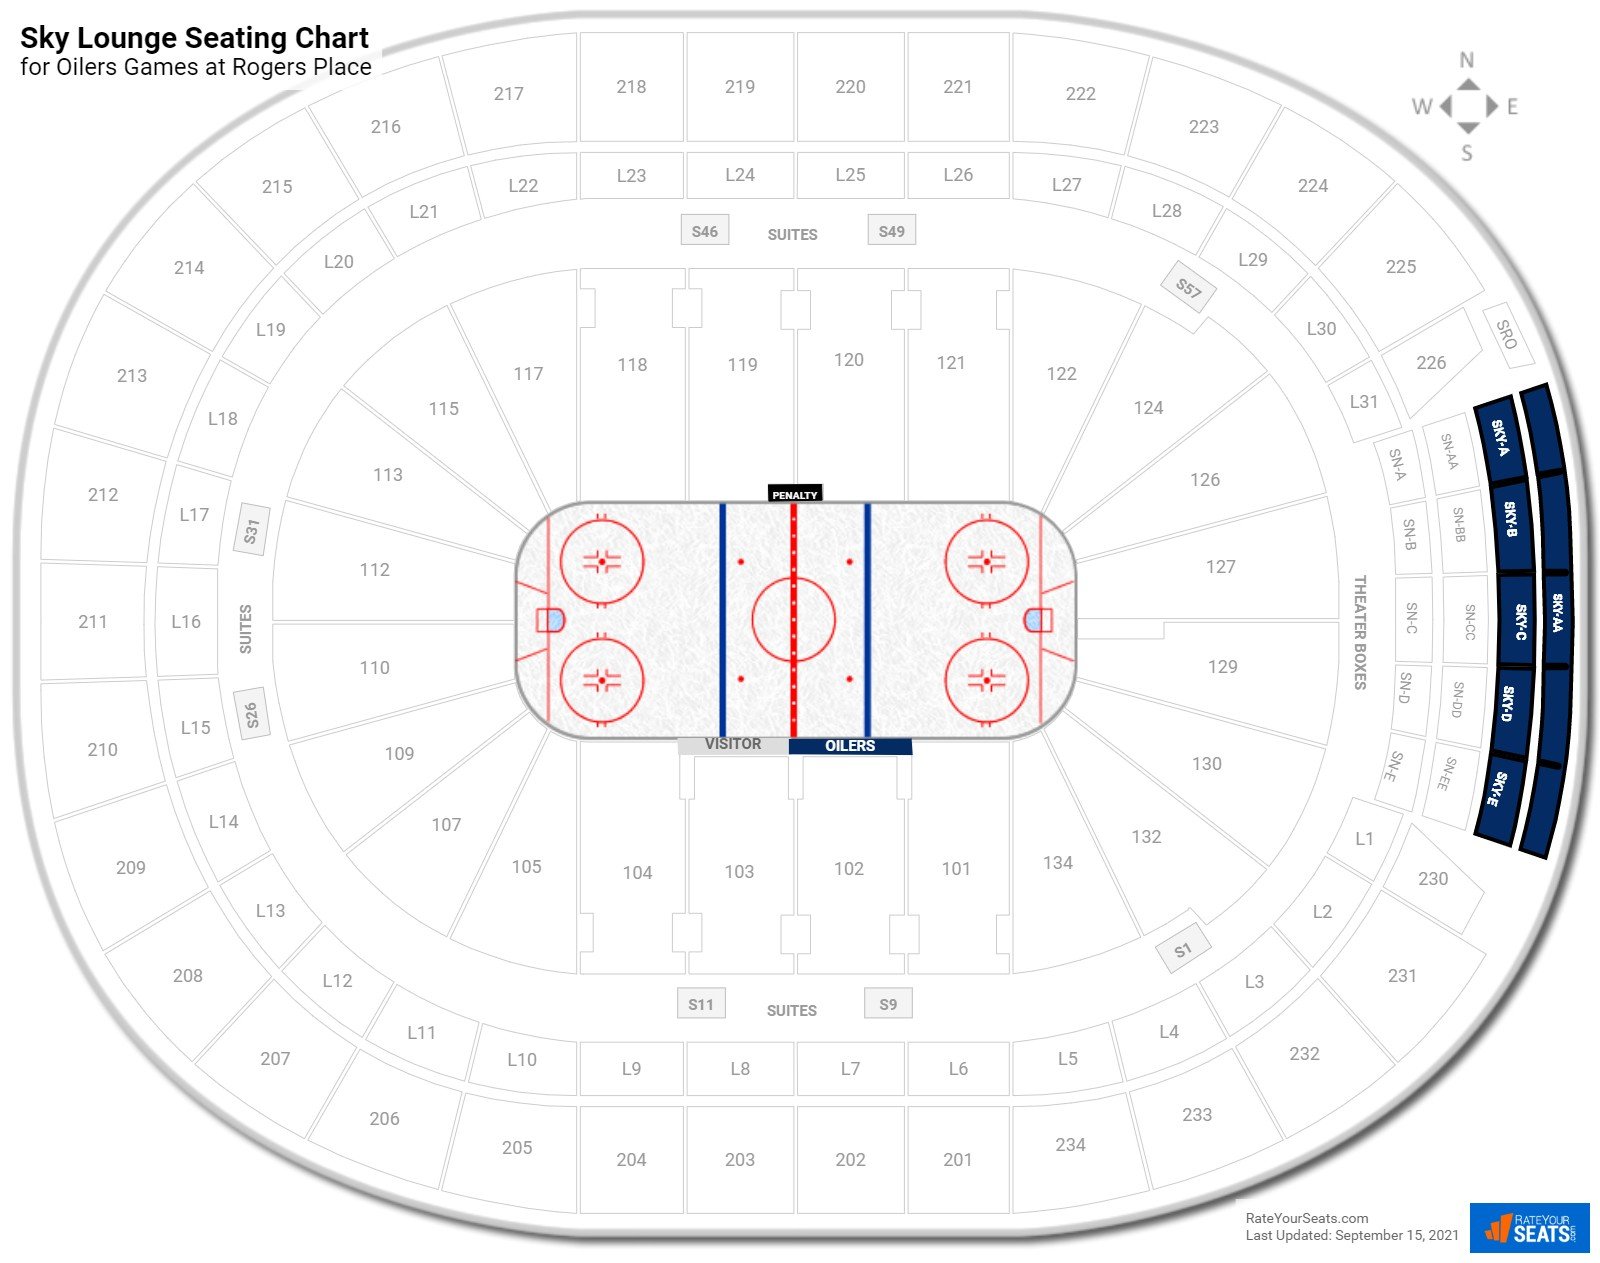 Oilers Sky Lounge Seating Chart at Rogers Place